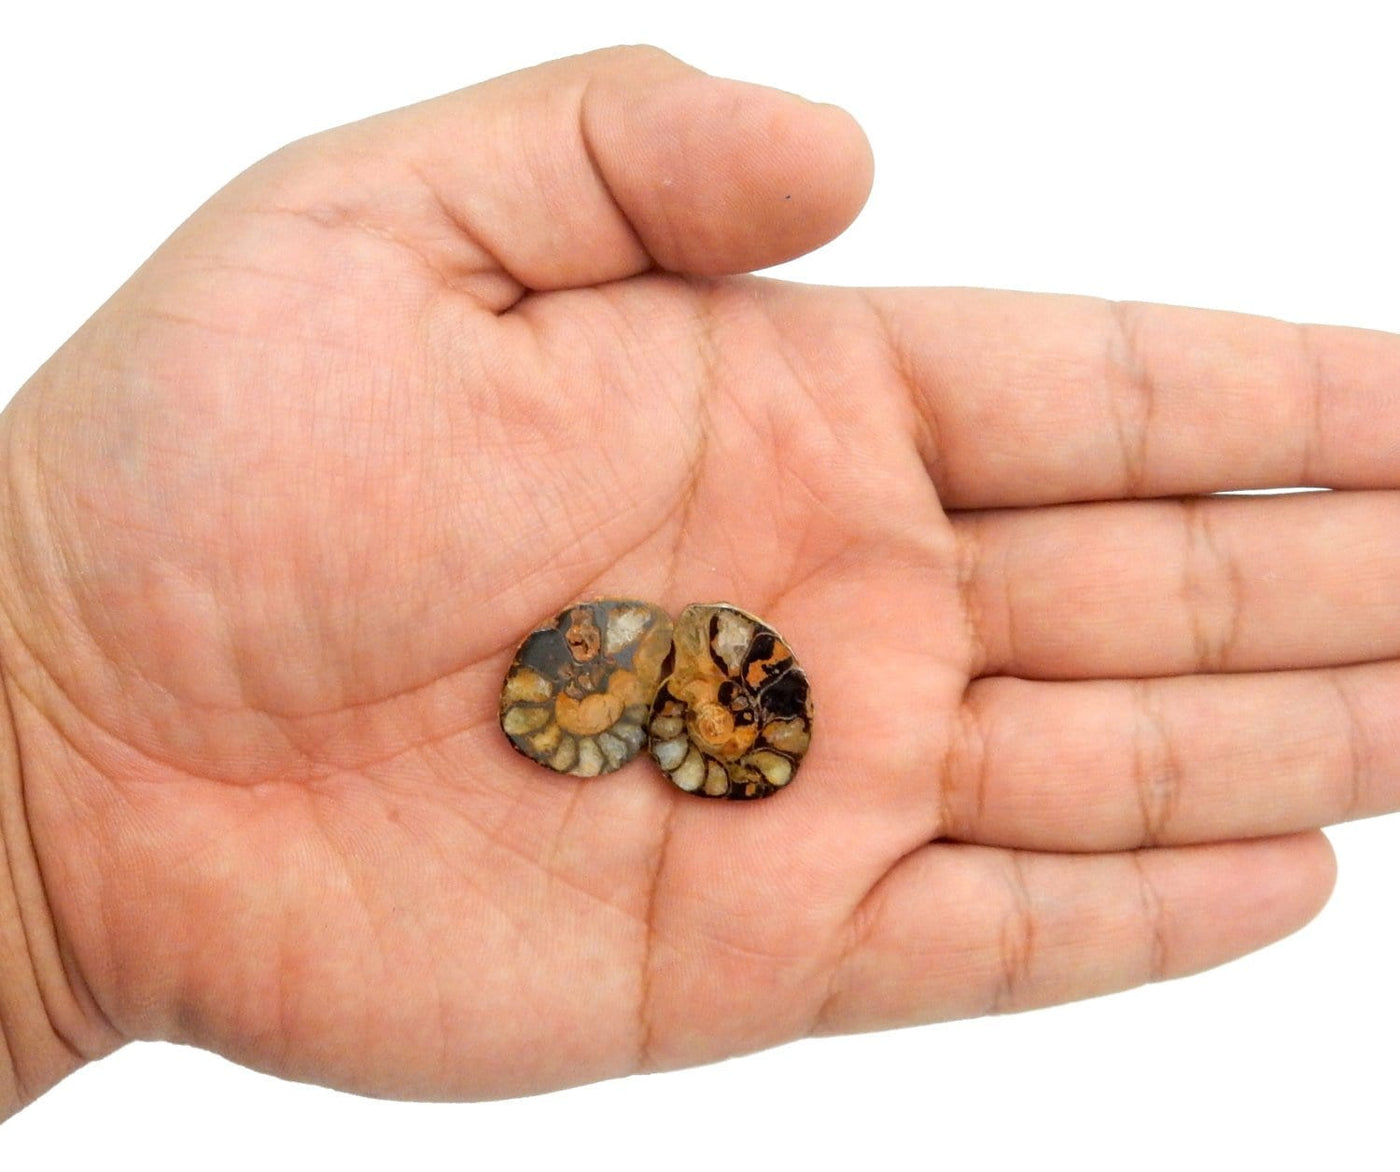 Ammonite fossil pair  in a hand.